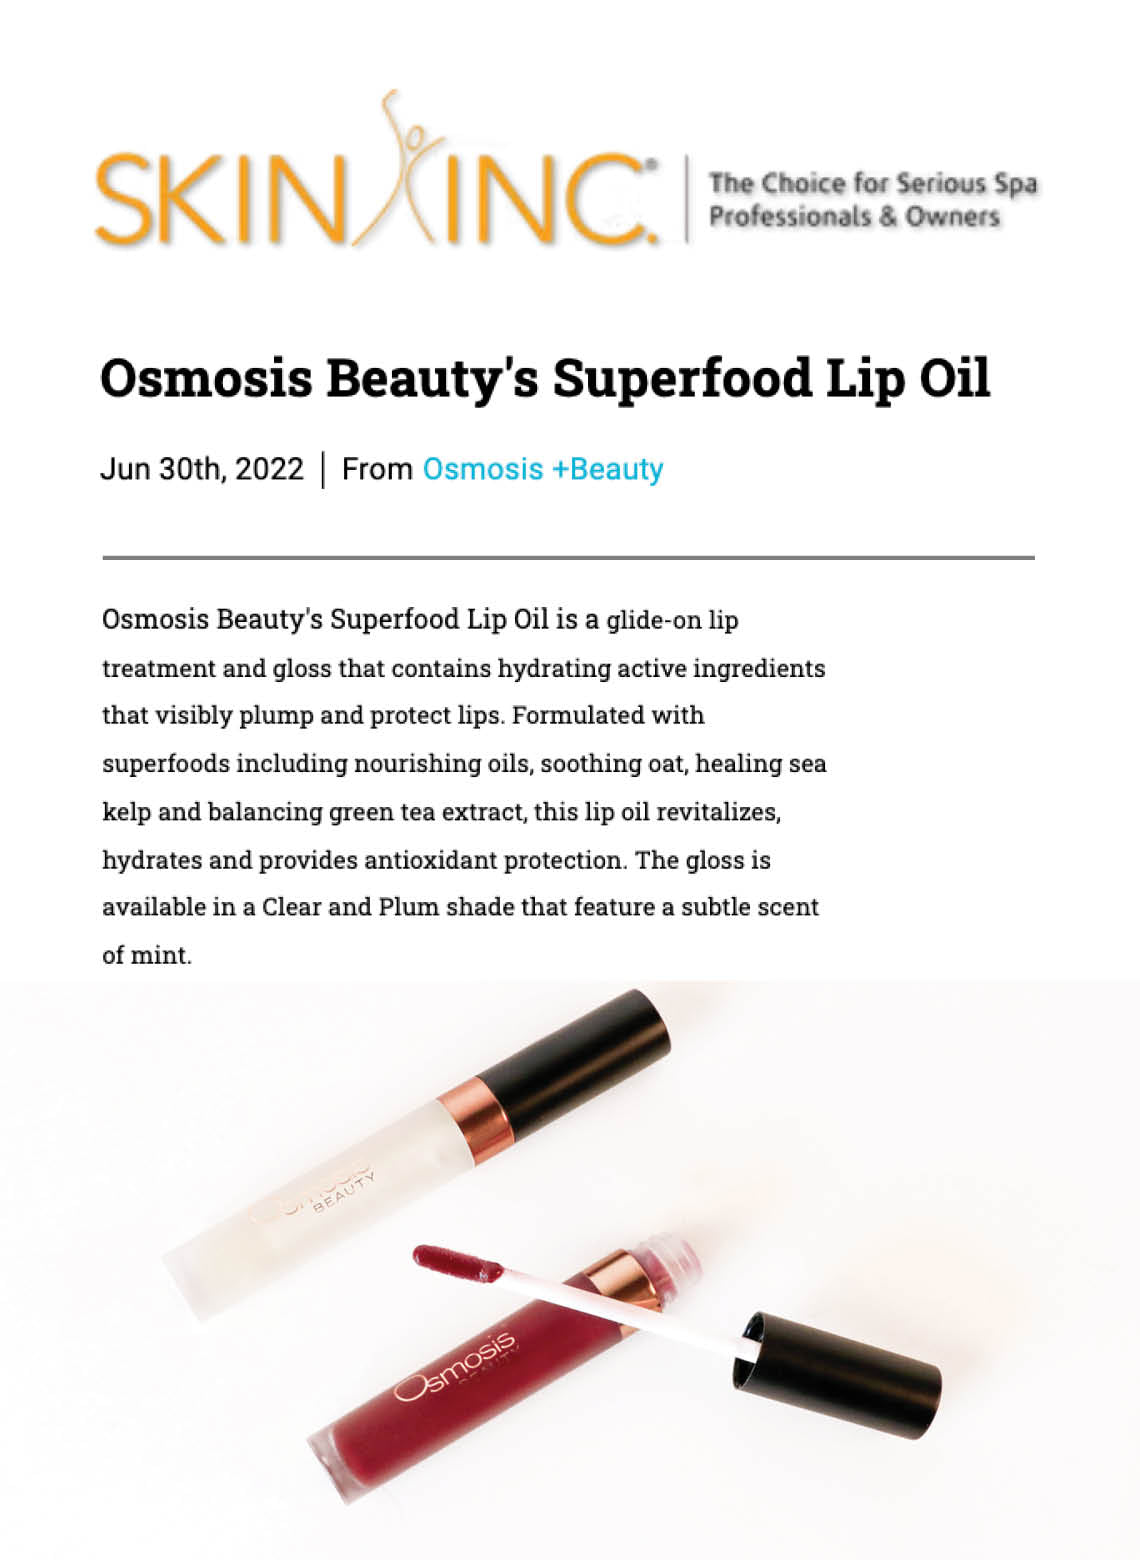 The Superfood Lip Oil was featured on the new products page at Skin Inc Online.